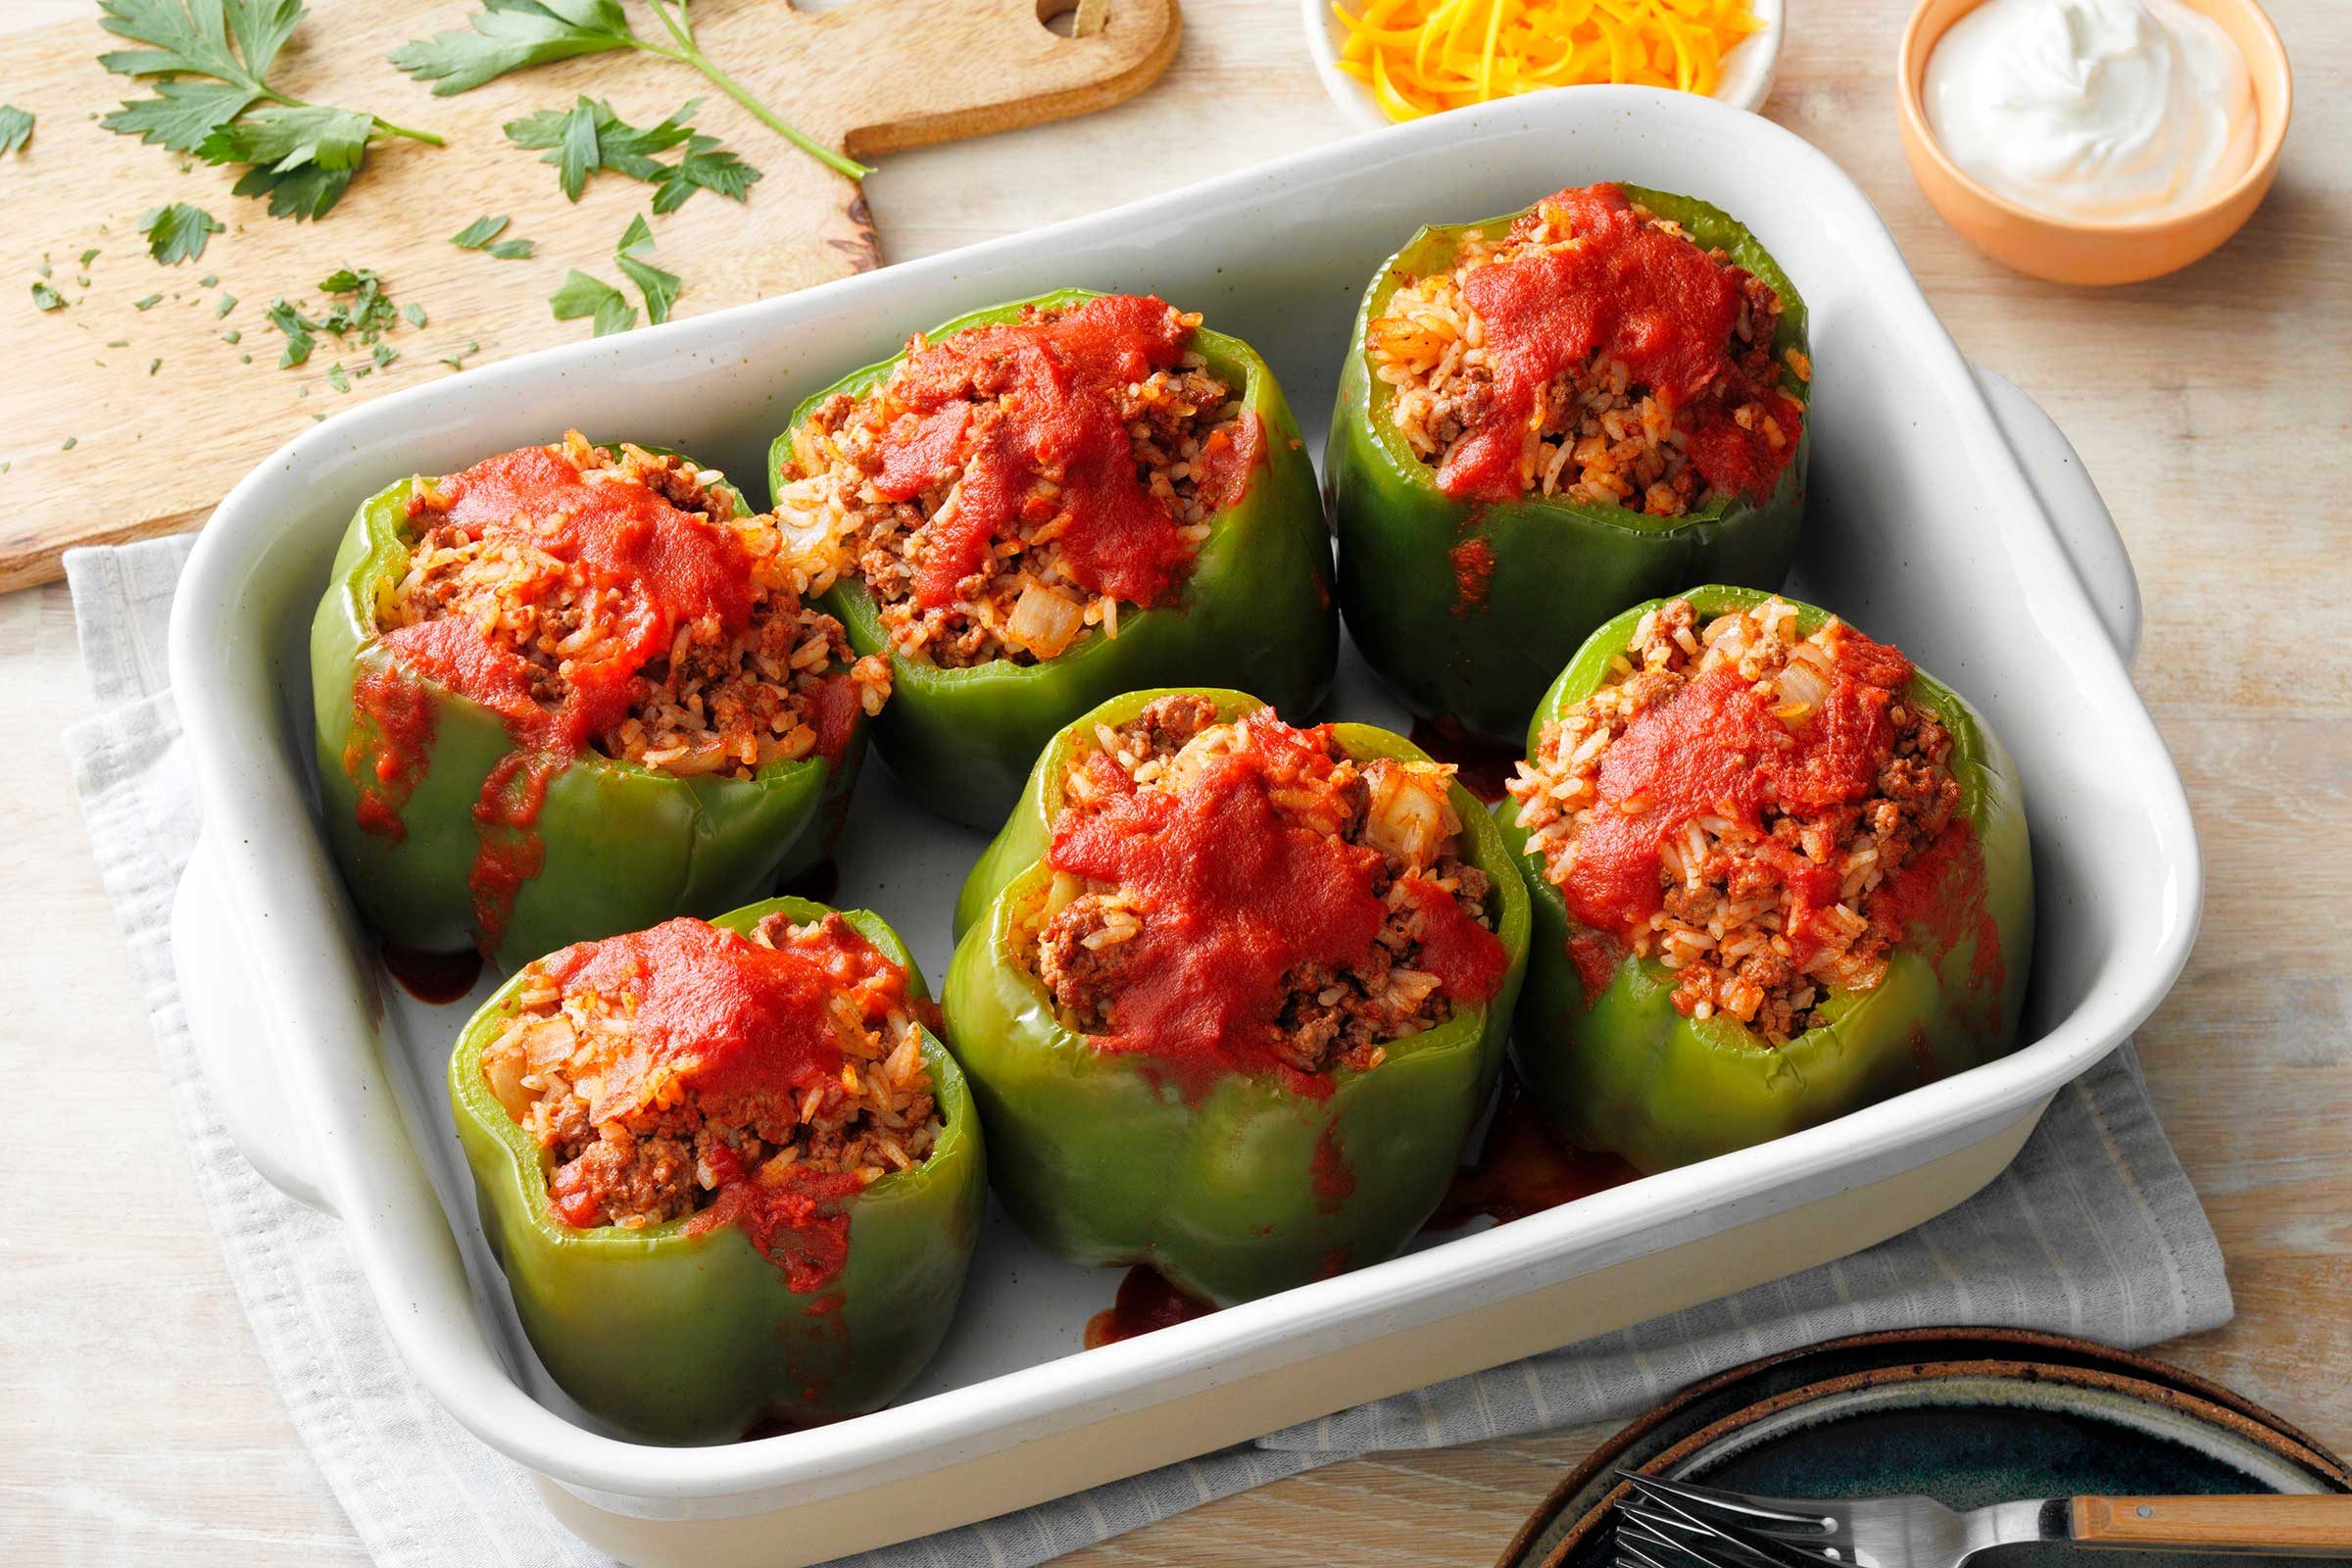 how-to-make-an-old-fashioned-stuffed-bell-peppers-recipe-just-like